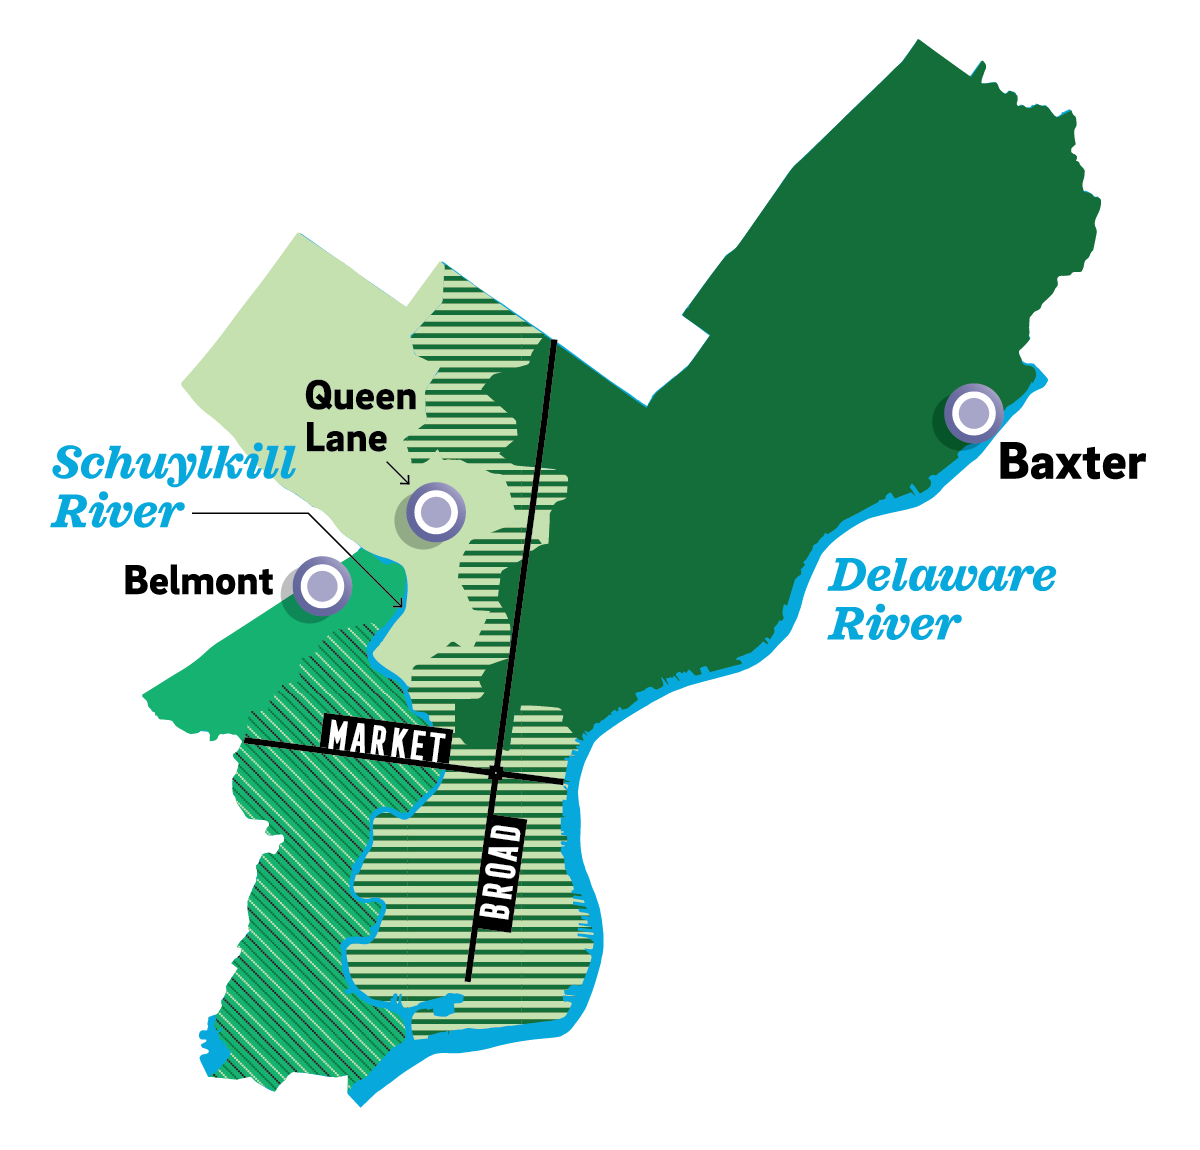 a simplified map of Philadelphia shows the Schuylkill and Delaware rivers, with Market and Broad Streets indicated for reference. PWD's three drinking water treatment plants are displayed - Belmont on the northern edge of West Philly, Queen Lane on the other side of the Schuylkill in the northwest, and Baxter up in the Northeast by the Delaware.  Areas of the city are shaded in different colors and patterns to indicate which plant(s) provide water to those sections - Belmont is the primary source for the part of Philadelphia west of the Schuylkill - most of that area also recieves a mix of water from the other plants, with only a strip in the northern part of West Philly being served exclusively by the Belmont plant. Queen Lane serves Northwest Philadelphia, and Baxter serves all of the North and Northeast. Those areas meet around north Broad Street, with sections around and slightly west of Broad, and much of Center City and all of South Philly receiving a mix of water from Queen Lane and Baxter.